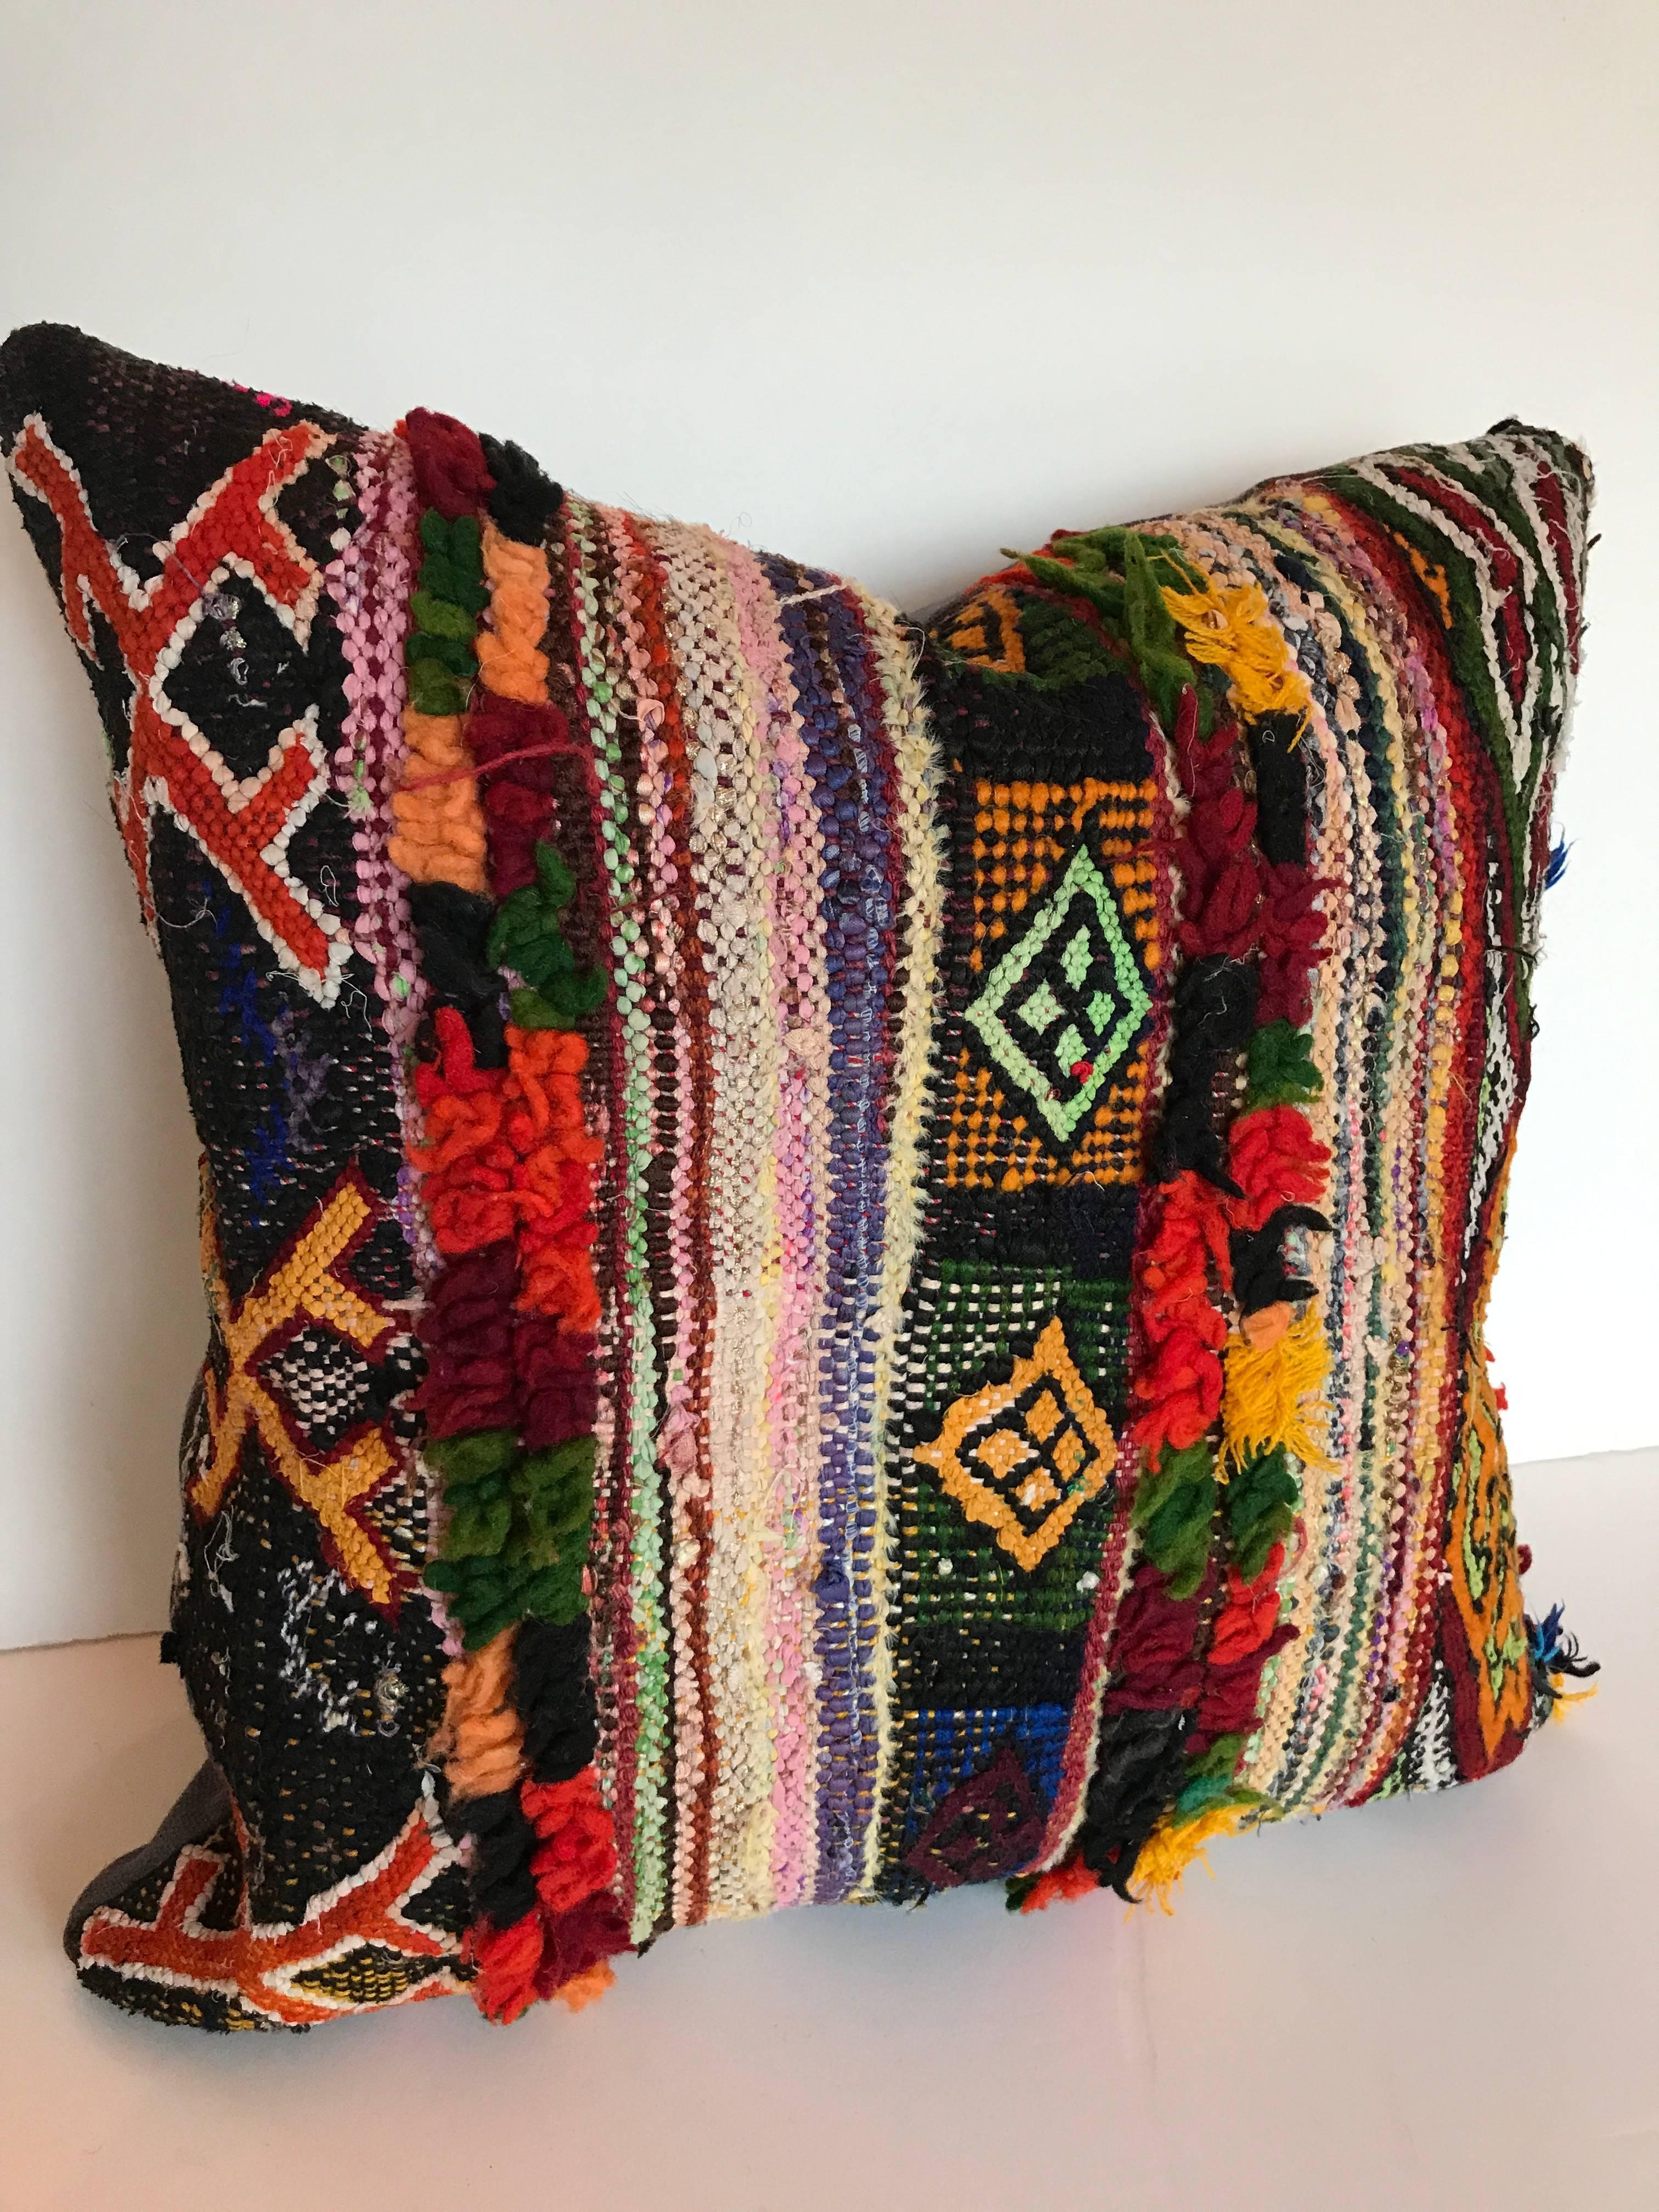 Custom pillow cut from a vintage hand loomed Boucherouite rug made by the Berber tribes of the Atlas Mountains.  The flat weave wool and cotton textiles is embellished with woven and tufted tribal designs.  The pillow is backed in linen, filled with